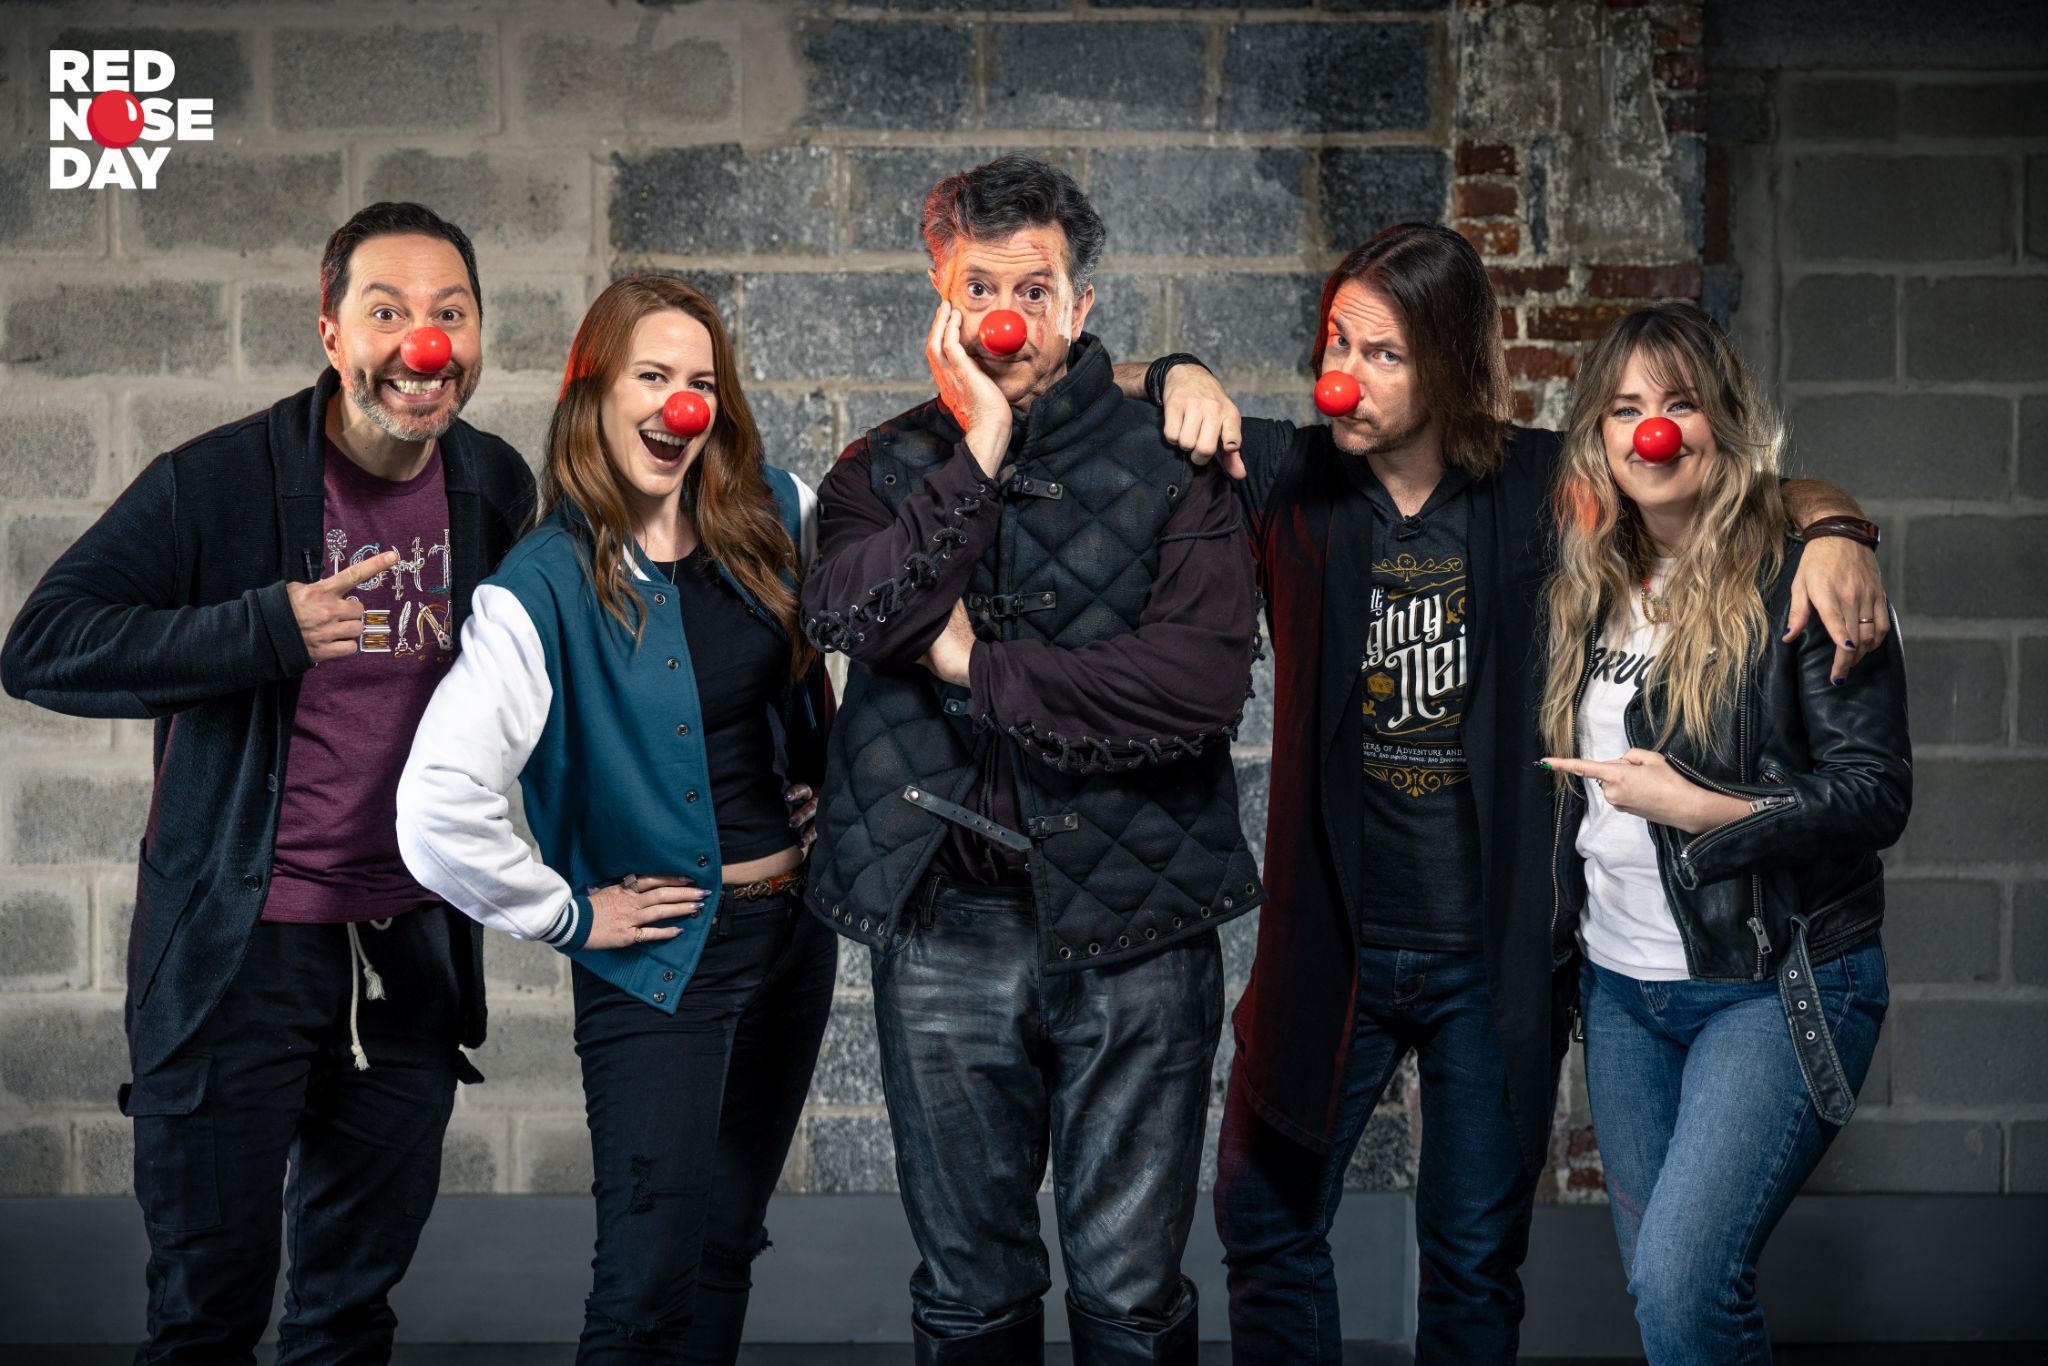 Stephen Colbert joins Critical Role for Red Nose Day charity stream tonight